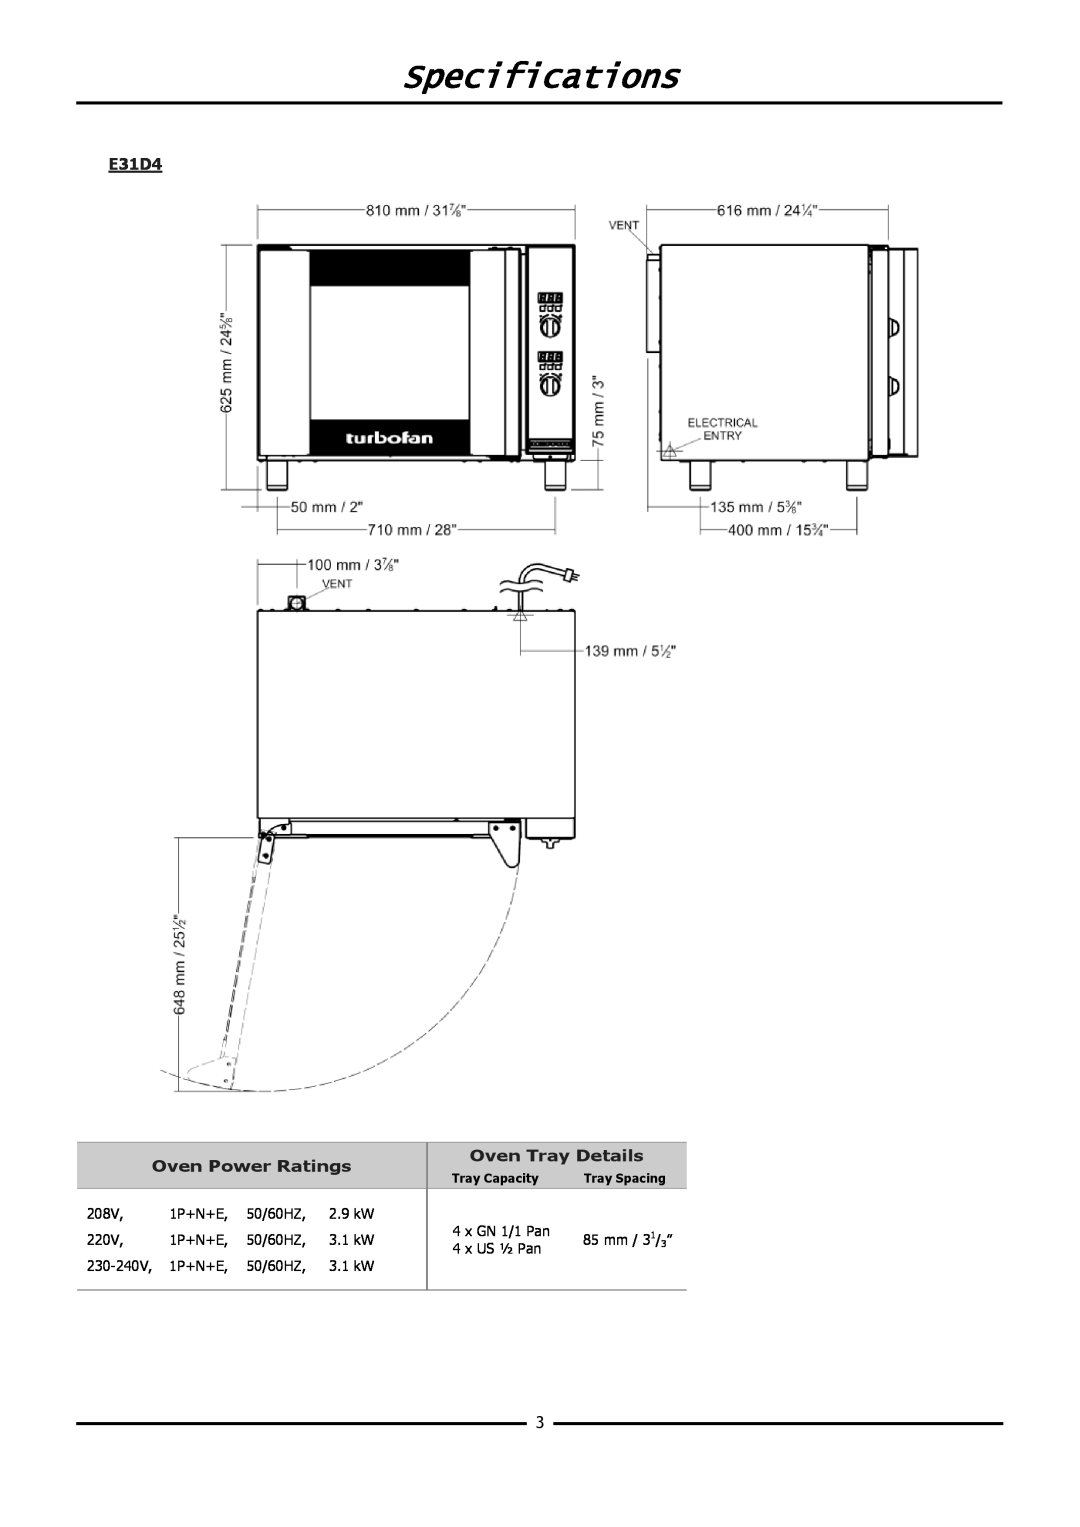 Moffat E31D4 operation manual Specifications, Oven Power Ratings, Oven Tray Details 